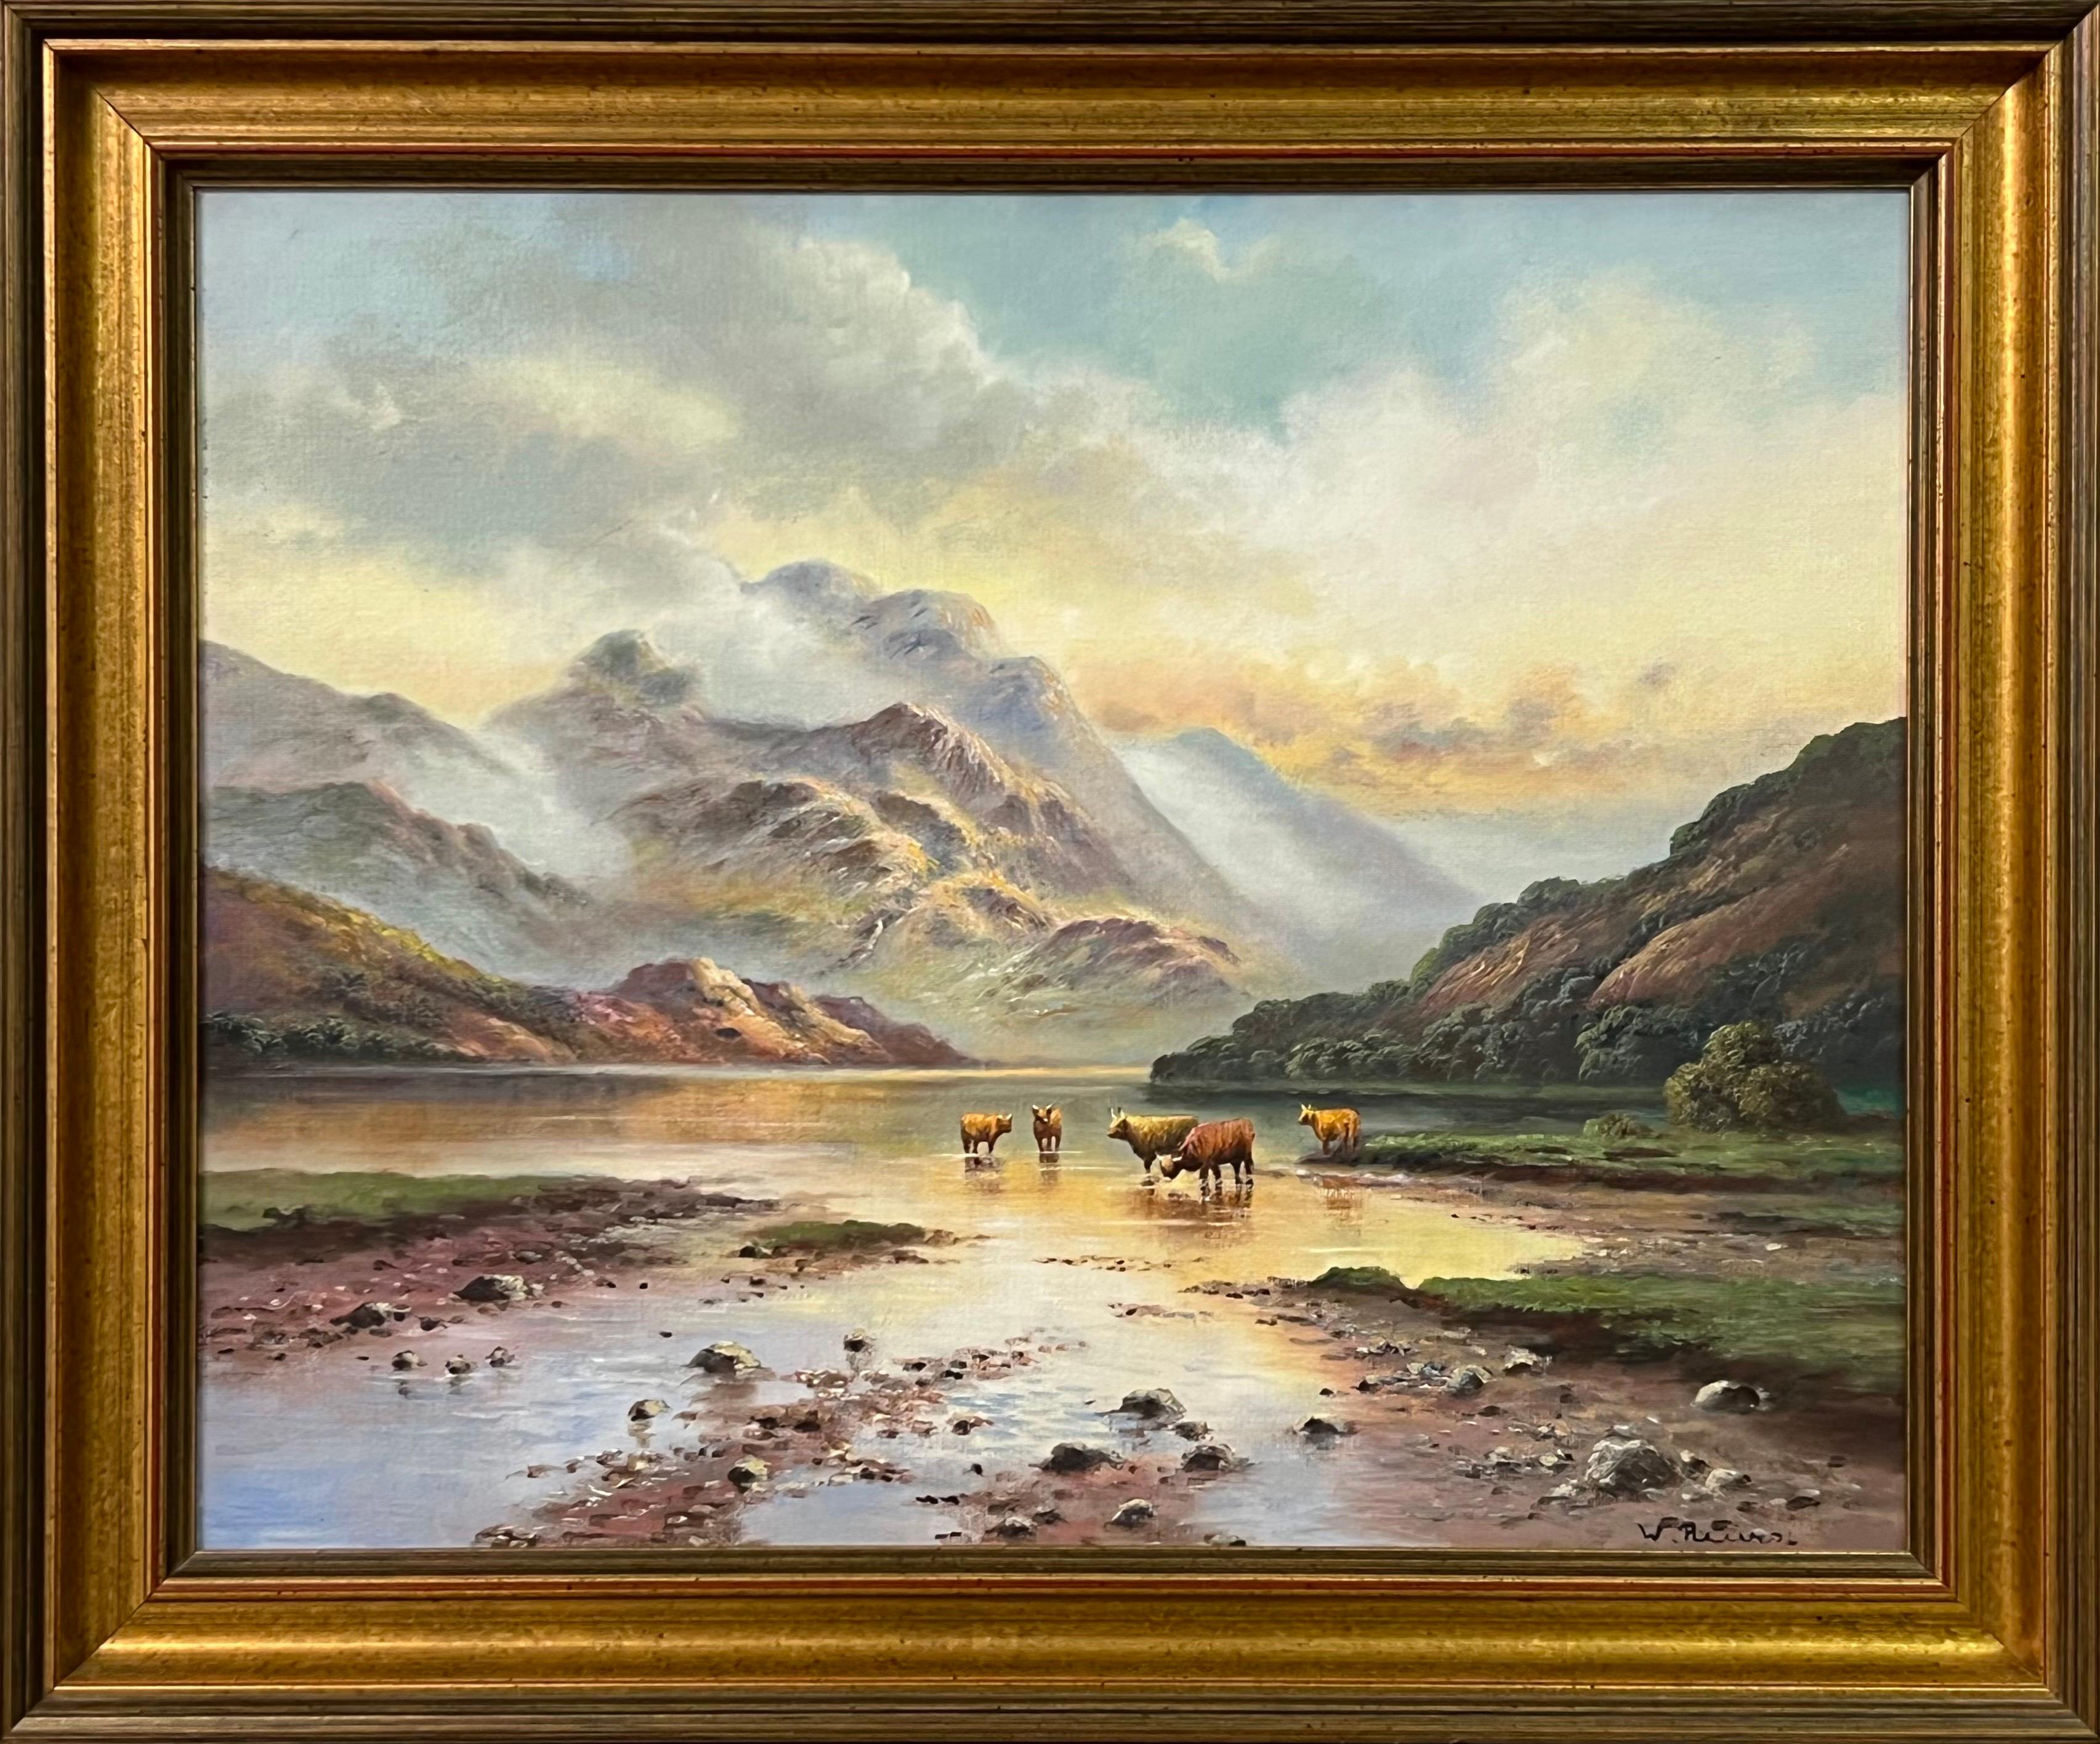 Oil Painting of Highland Cows in Scotland Loch by 20th Century British Artist Wendy Reeves. 

Art measures 20 x 16 inches
Frame measures 24 x 20 inches 

Wendy Reeves garnered acclaim for her Scottish Highland and Lakeland paintings. Born in 1944 in